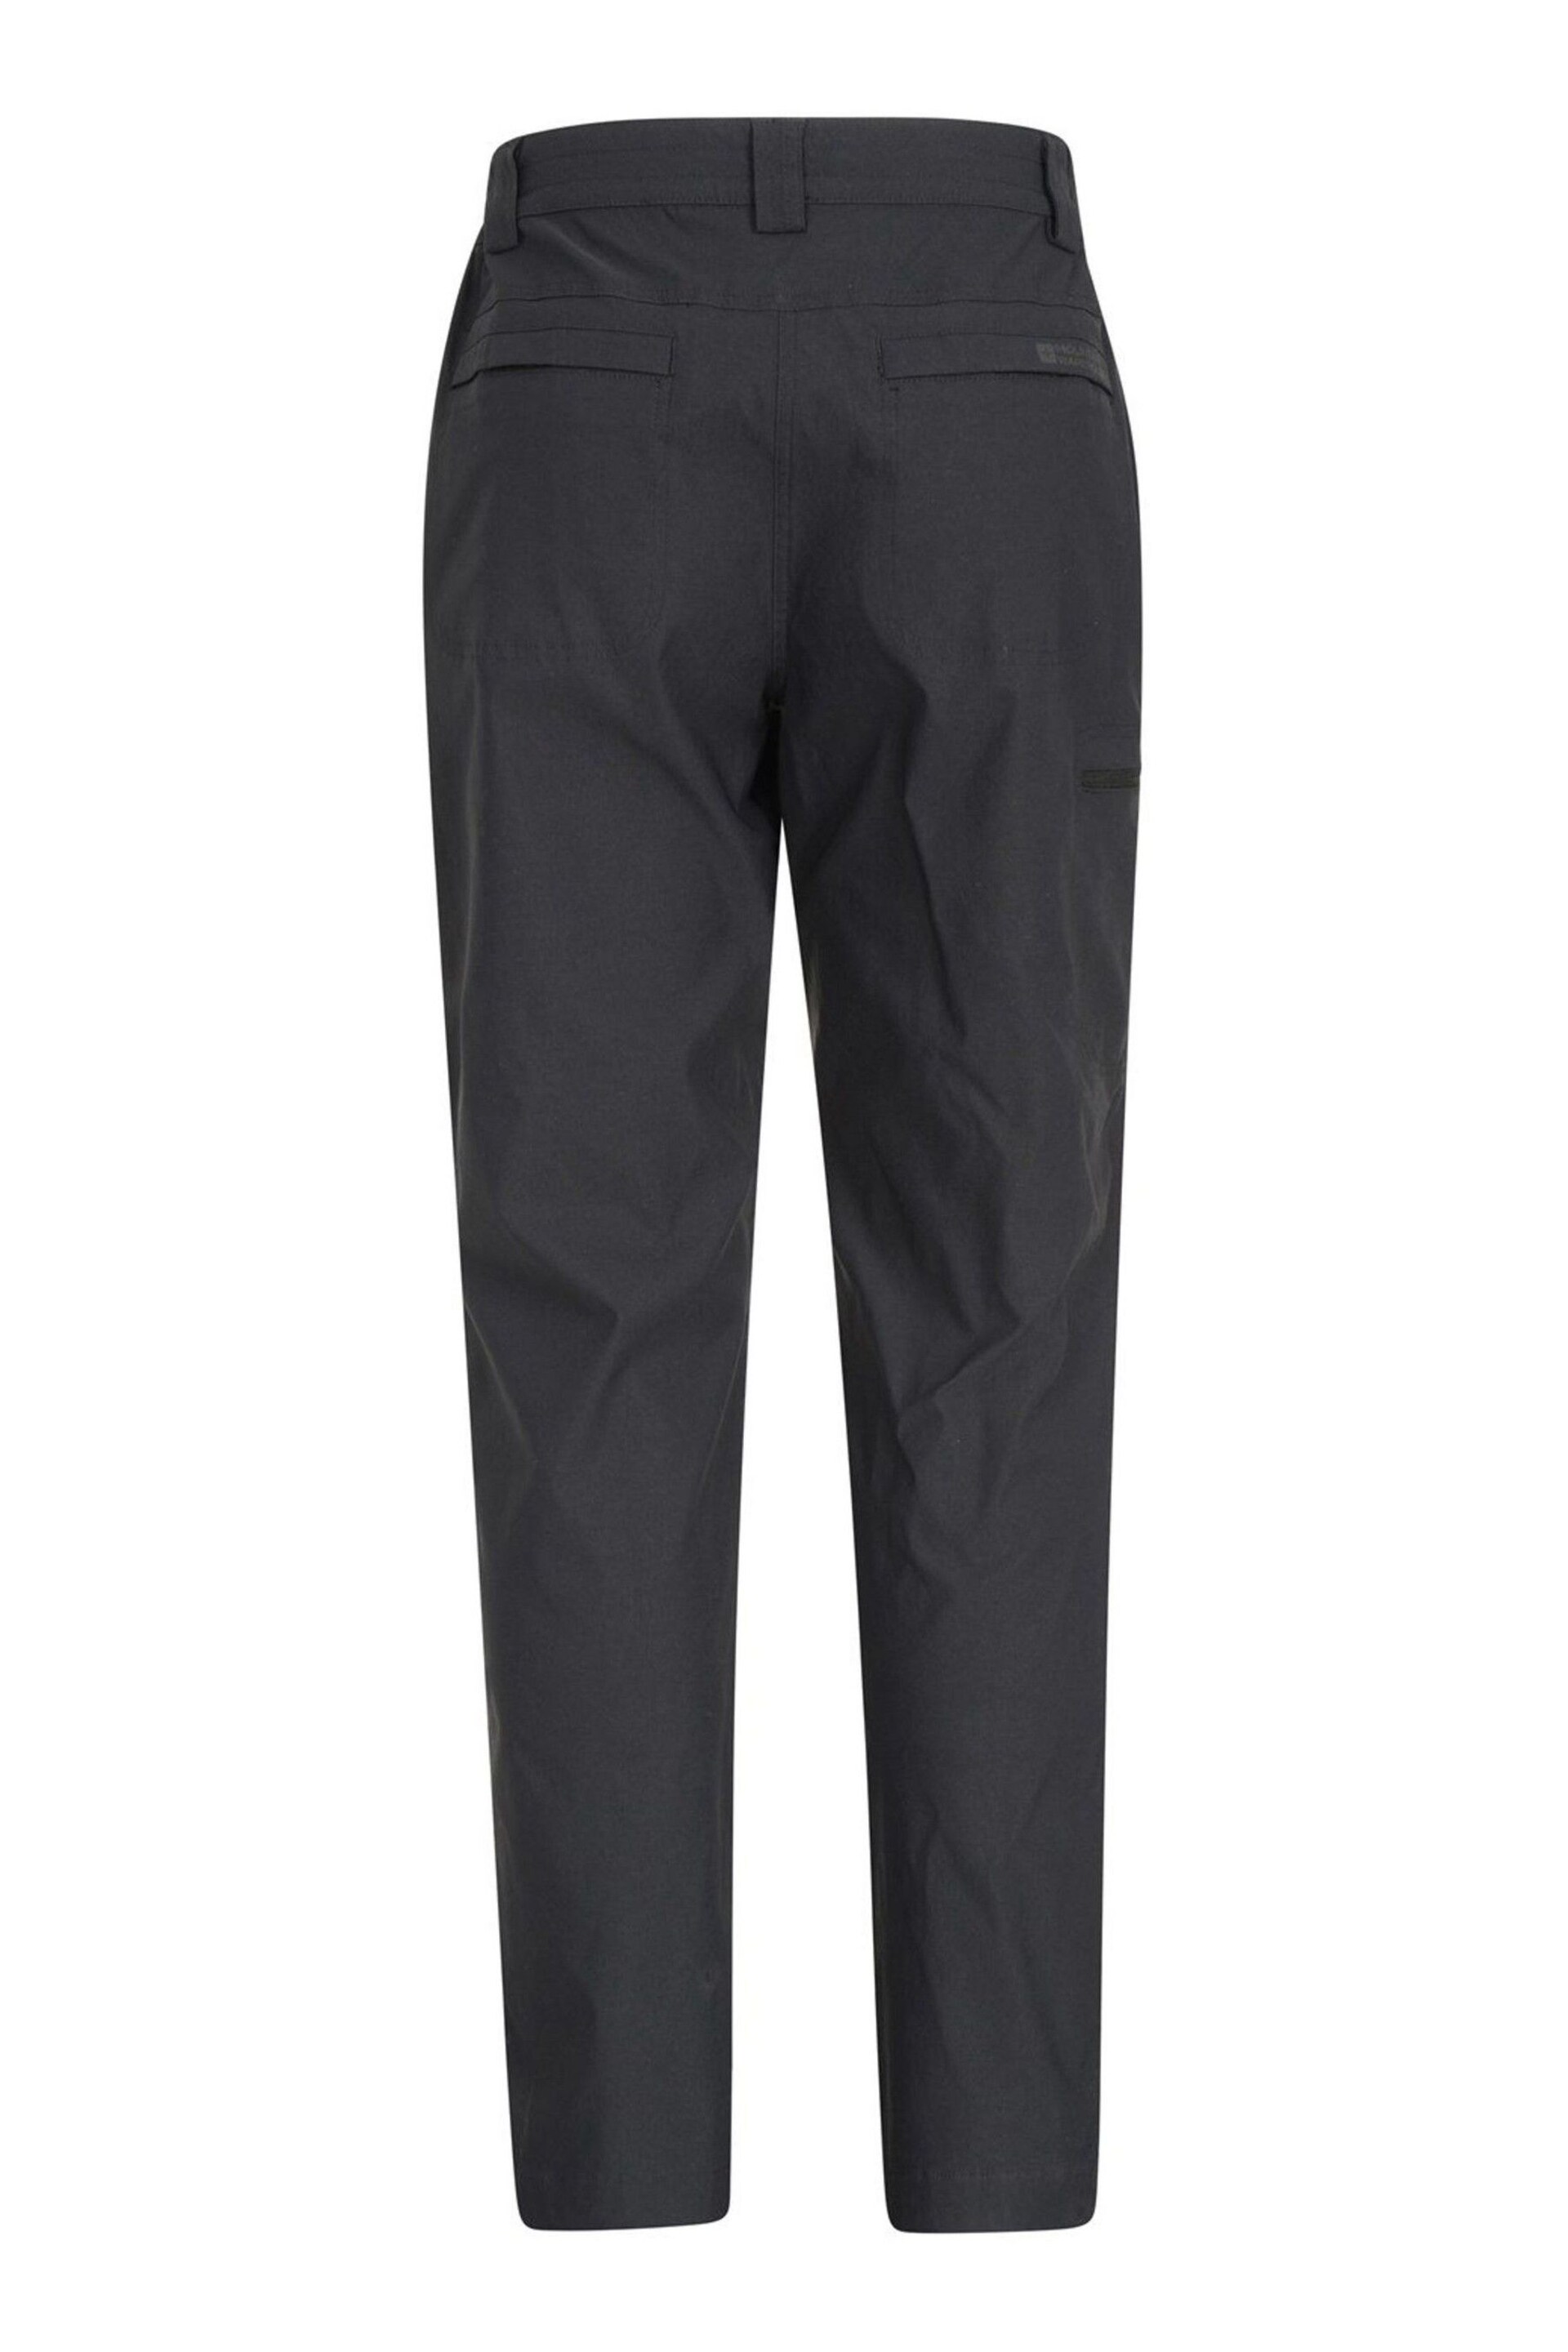 Mountain Warehouse Black Womens Hiker Lightweight Stretch UV Protect Walking Trousers - Image 4 of 4